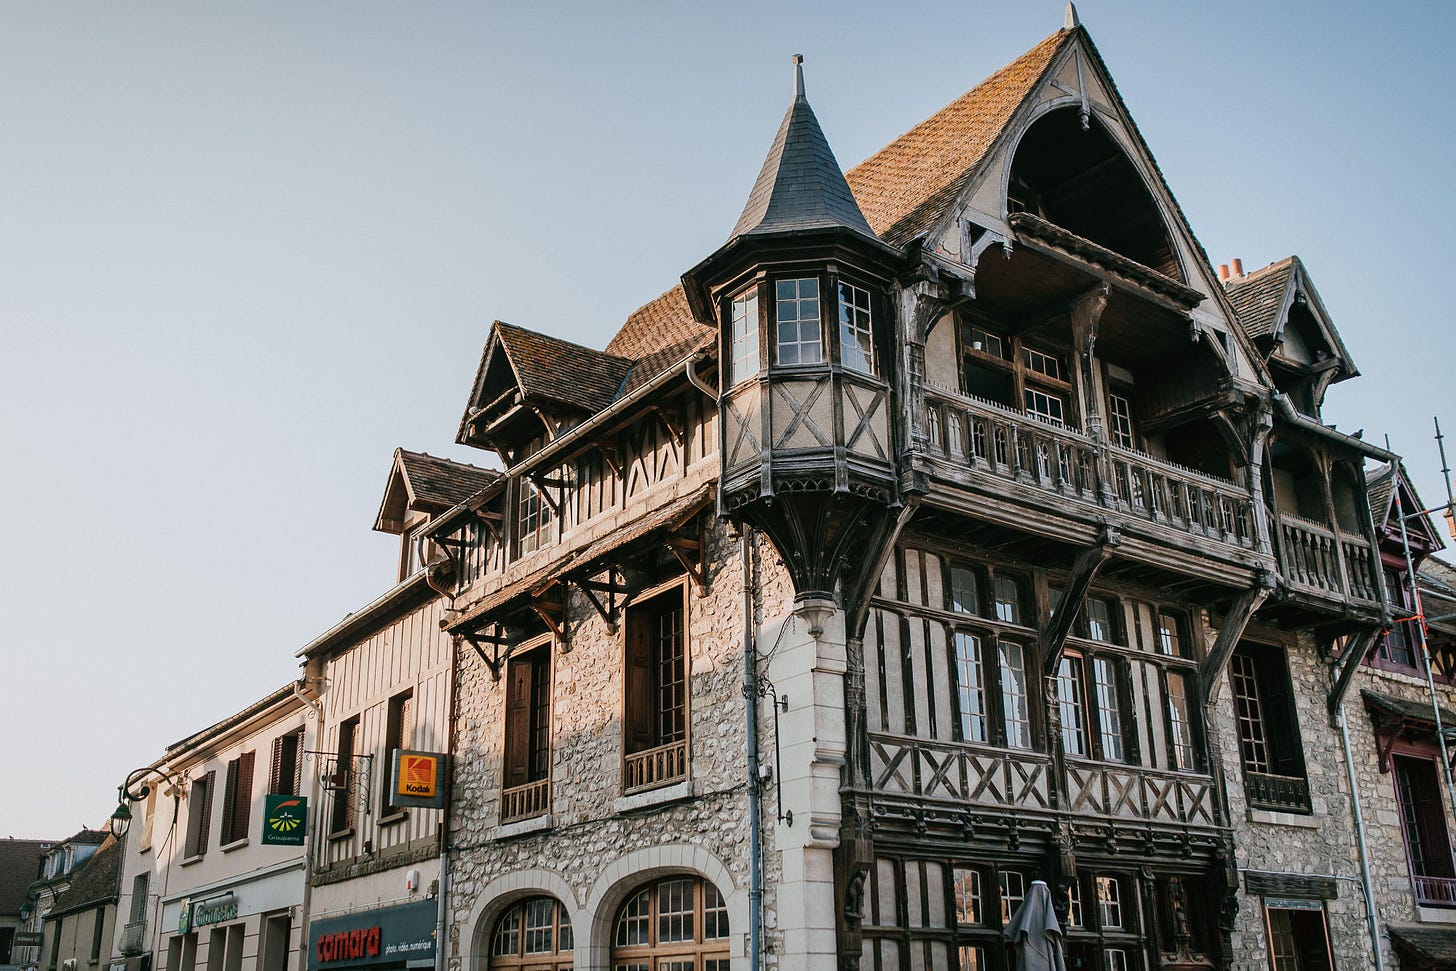 A building in the style of French colombage in Moret-sur-Loing, France